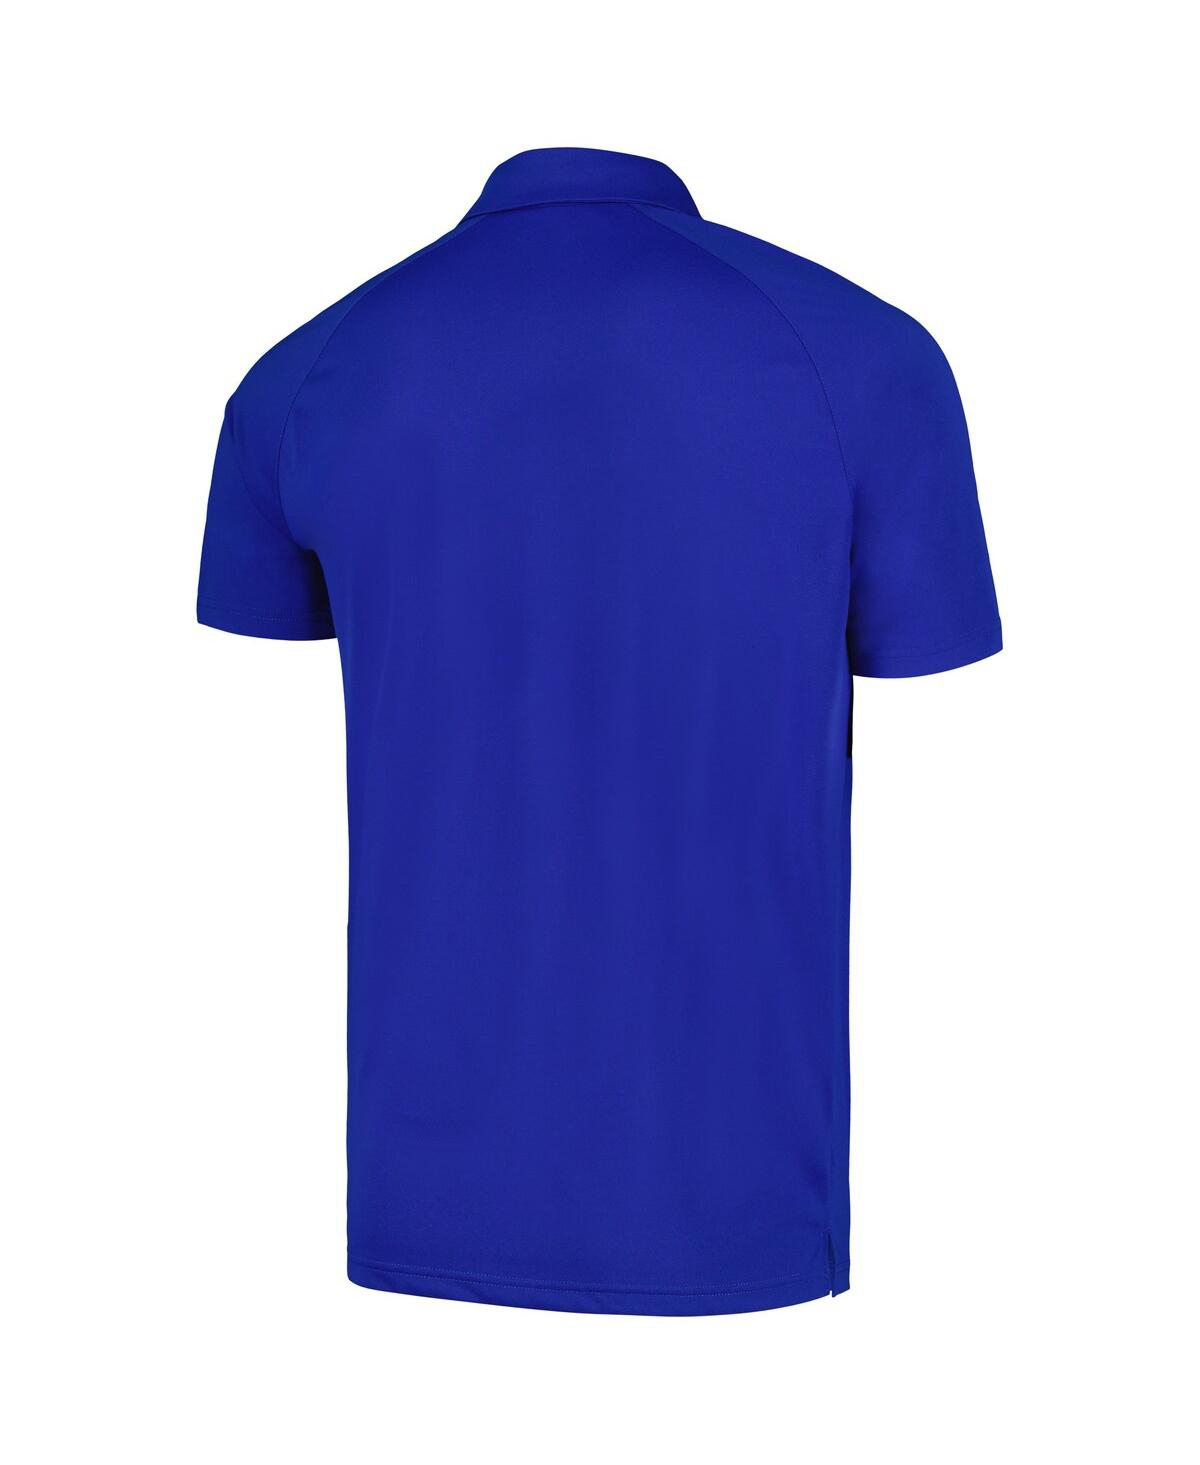 Men's Levelwear Royal Milwaukee Brewers Omaha One-Hit Polo Size: Small